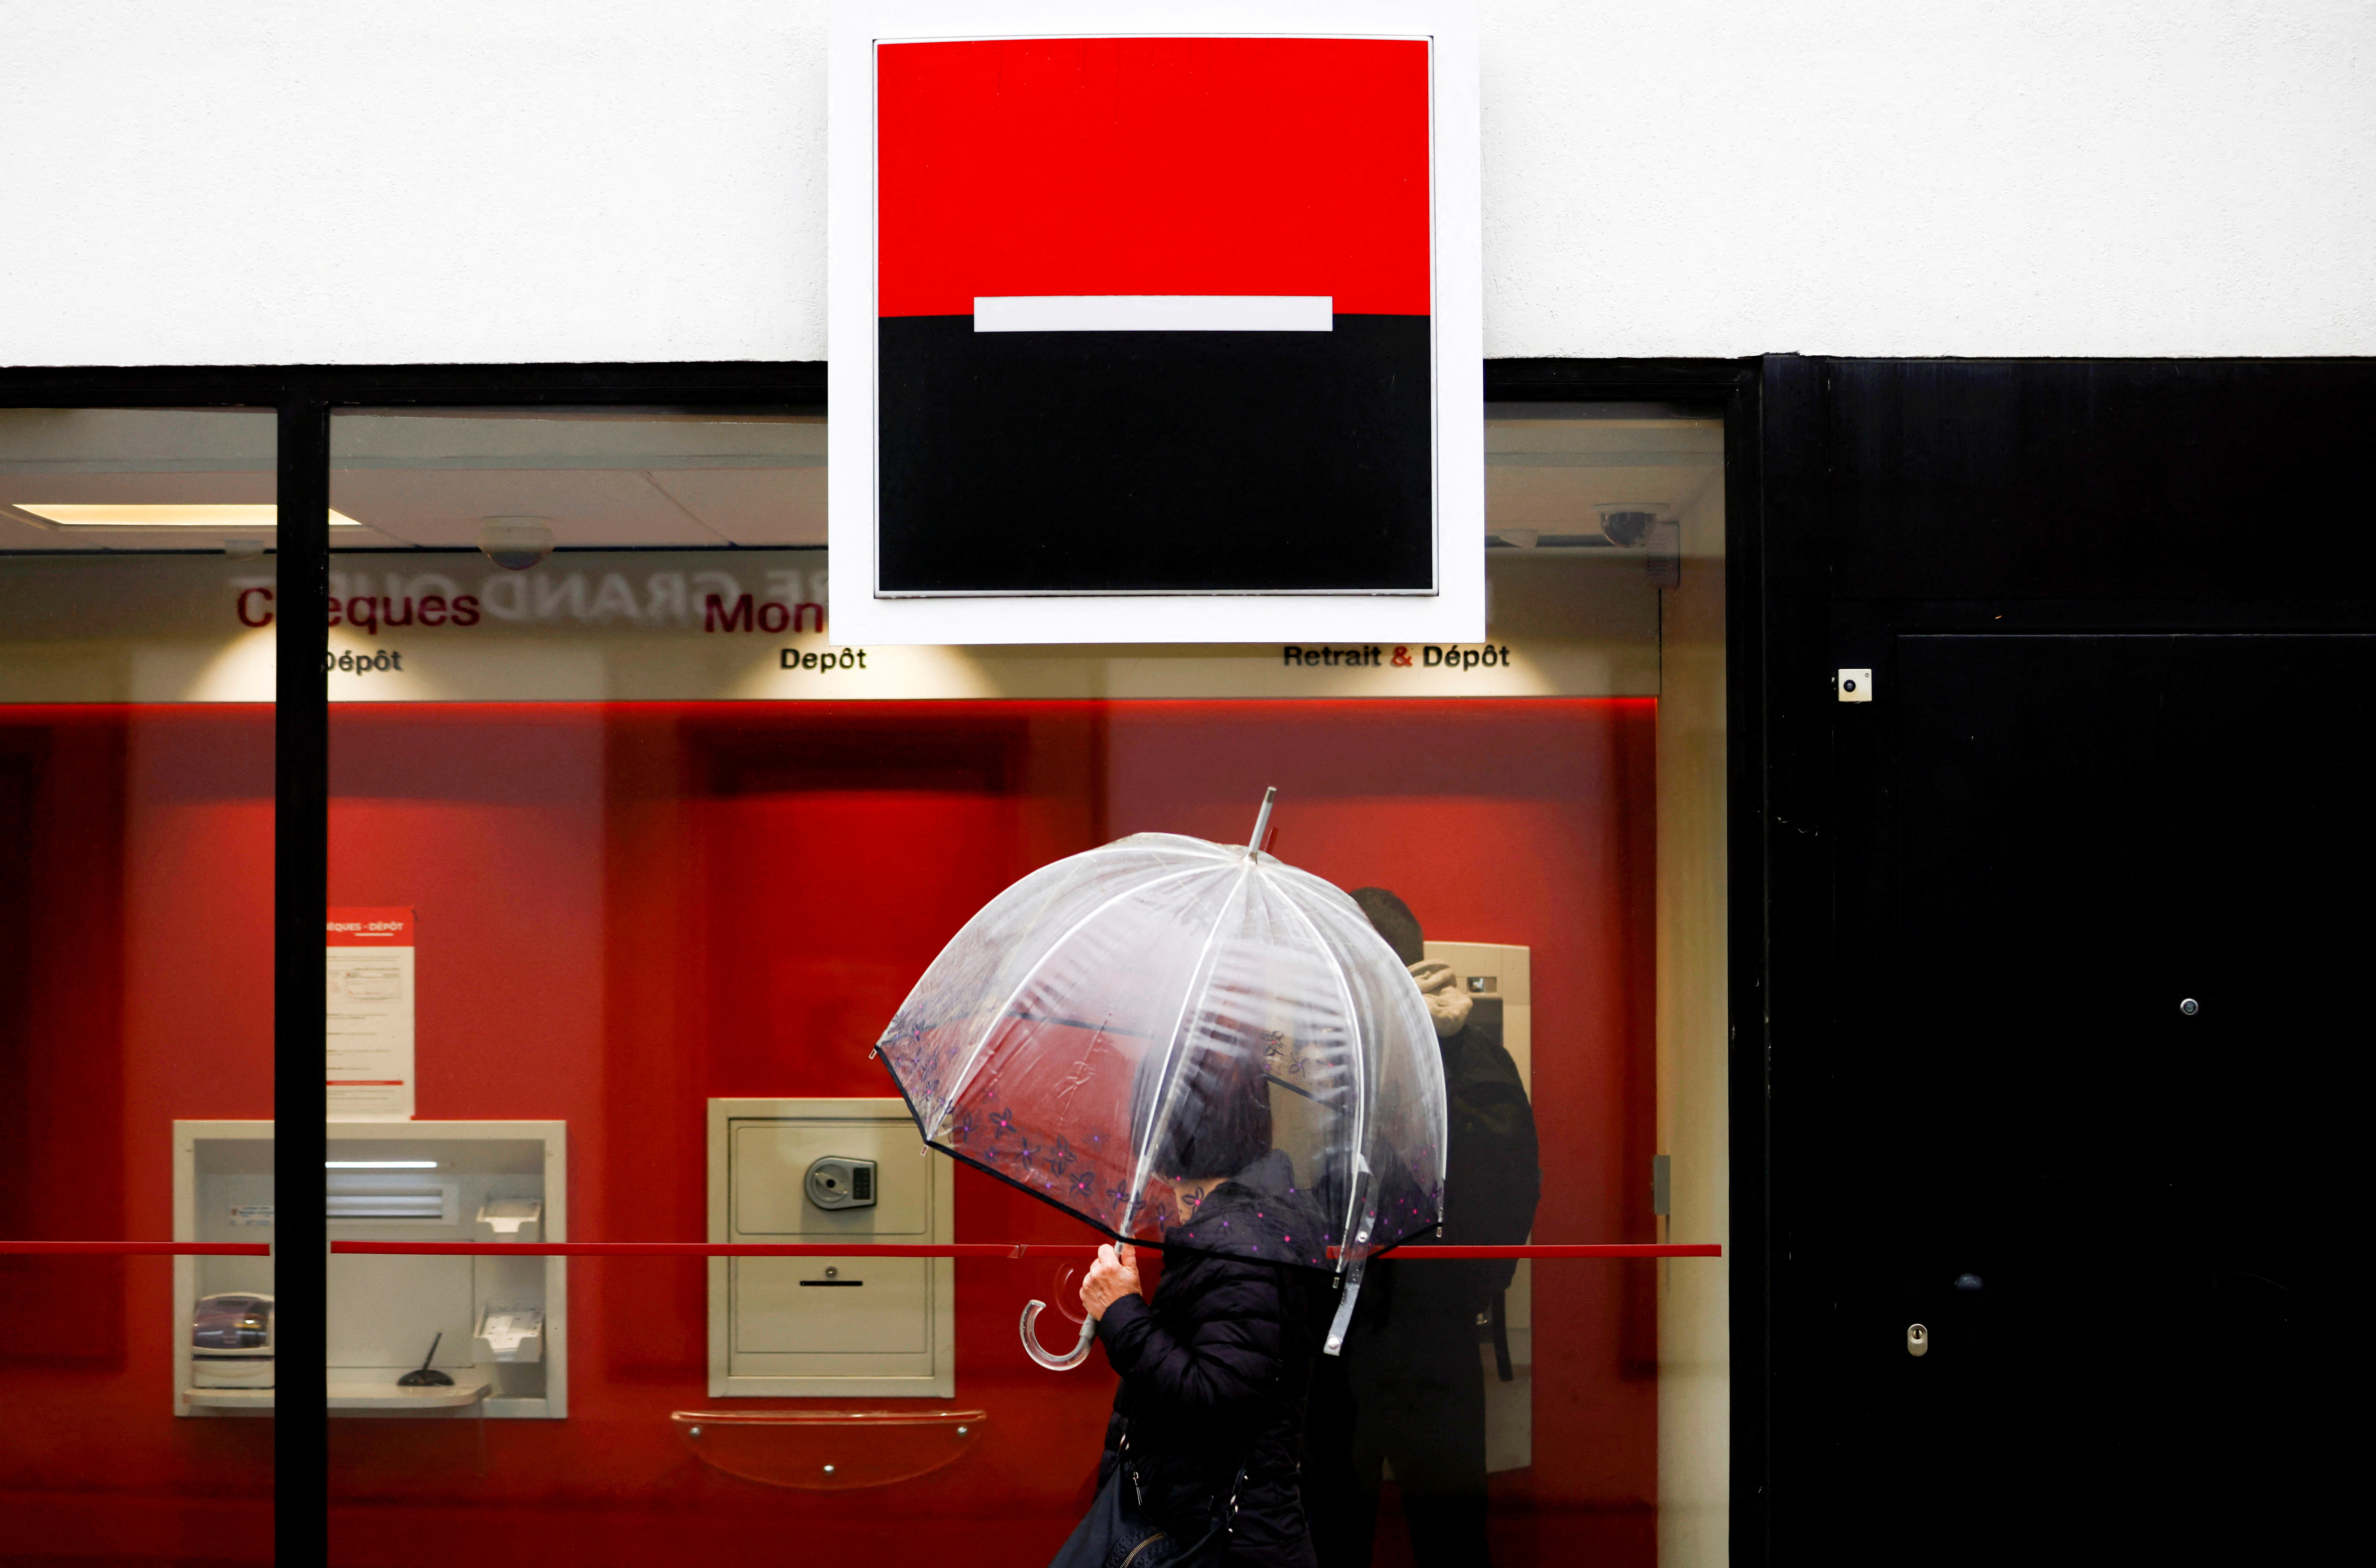 A person holds an umbrella as the logo of French Bank Societe Generale is seen outside a bank building in Saint-Sebastien-sur-Loire near Nantes